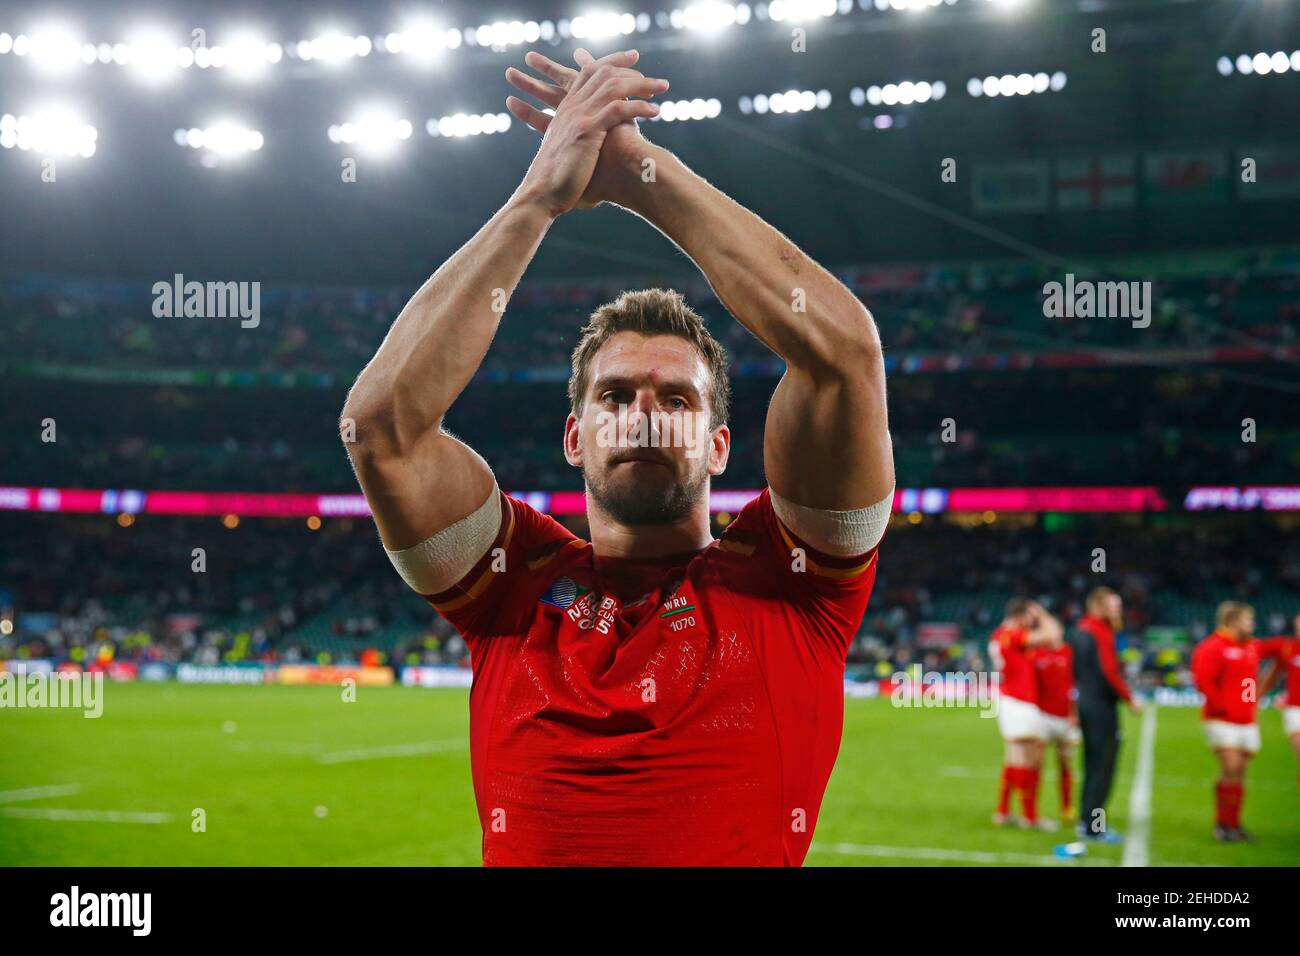 Rugby Union - England v Wales - IRB Rugby World Cup 2015 Pool A - Twickenham Stadium, London, England - 26/9/15  Sam Warburton of Wales applauds fans after victory  Reuters / Andrew Winning  Livepic Stock Photo